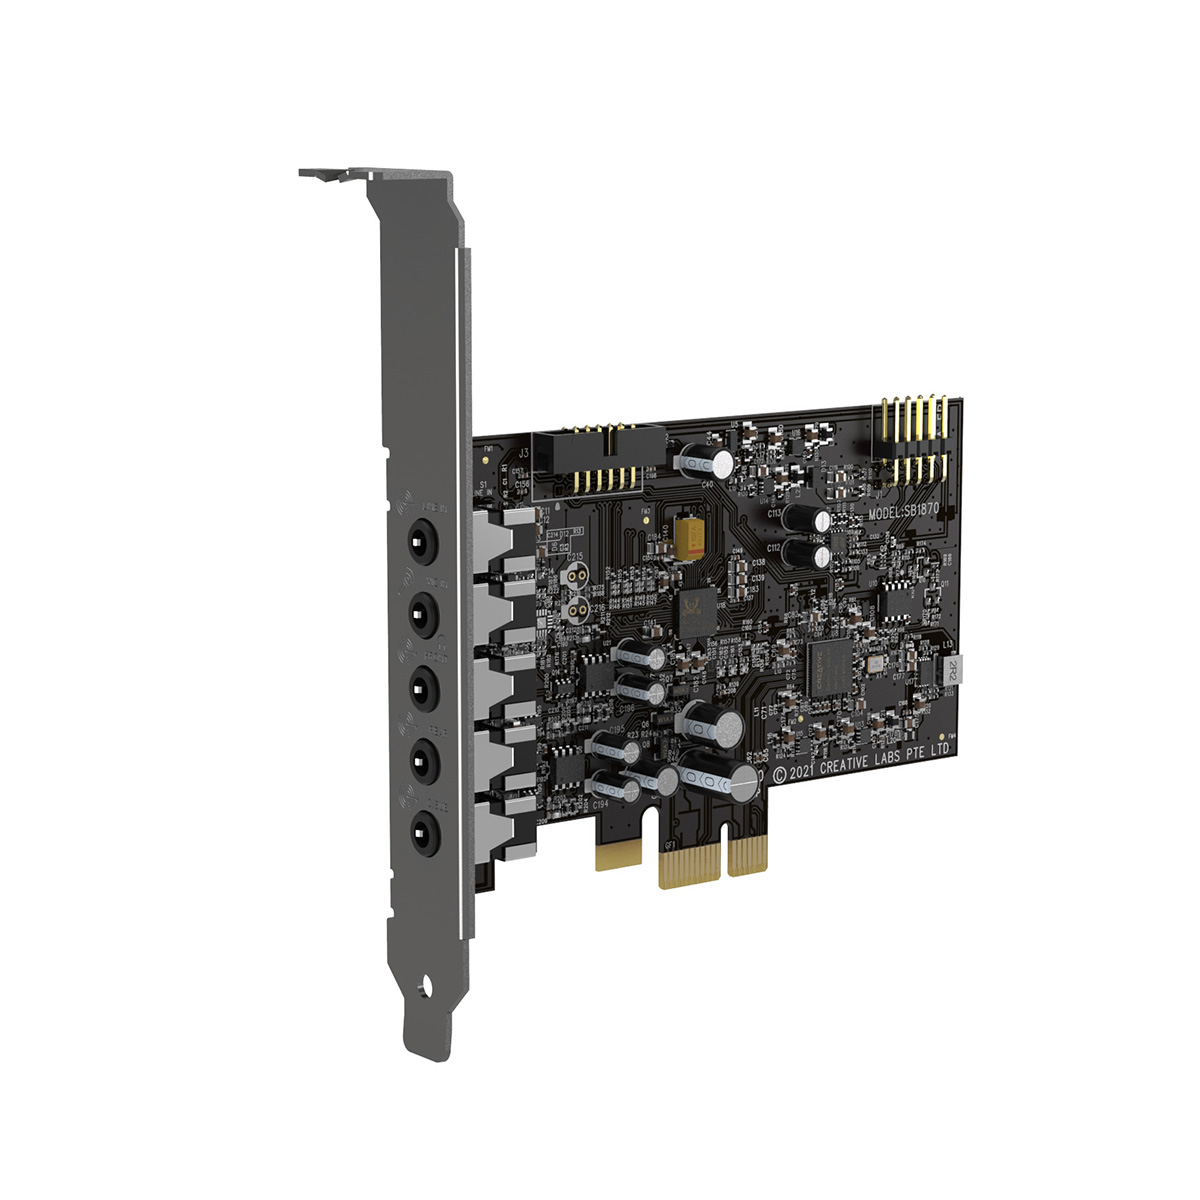 Creative Sound Blaster Audigy FX V2 Upgradable Hi-res 5.1 PCI-e Sound Card with SmartComms Kit